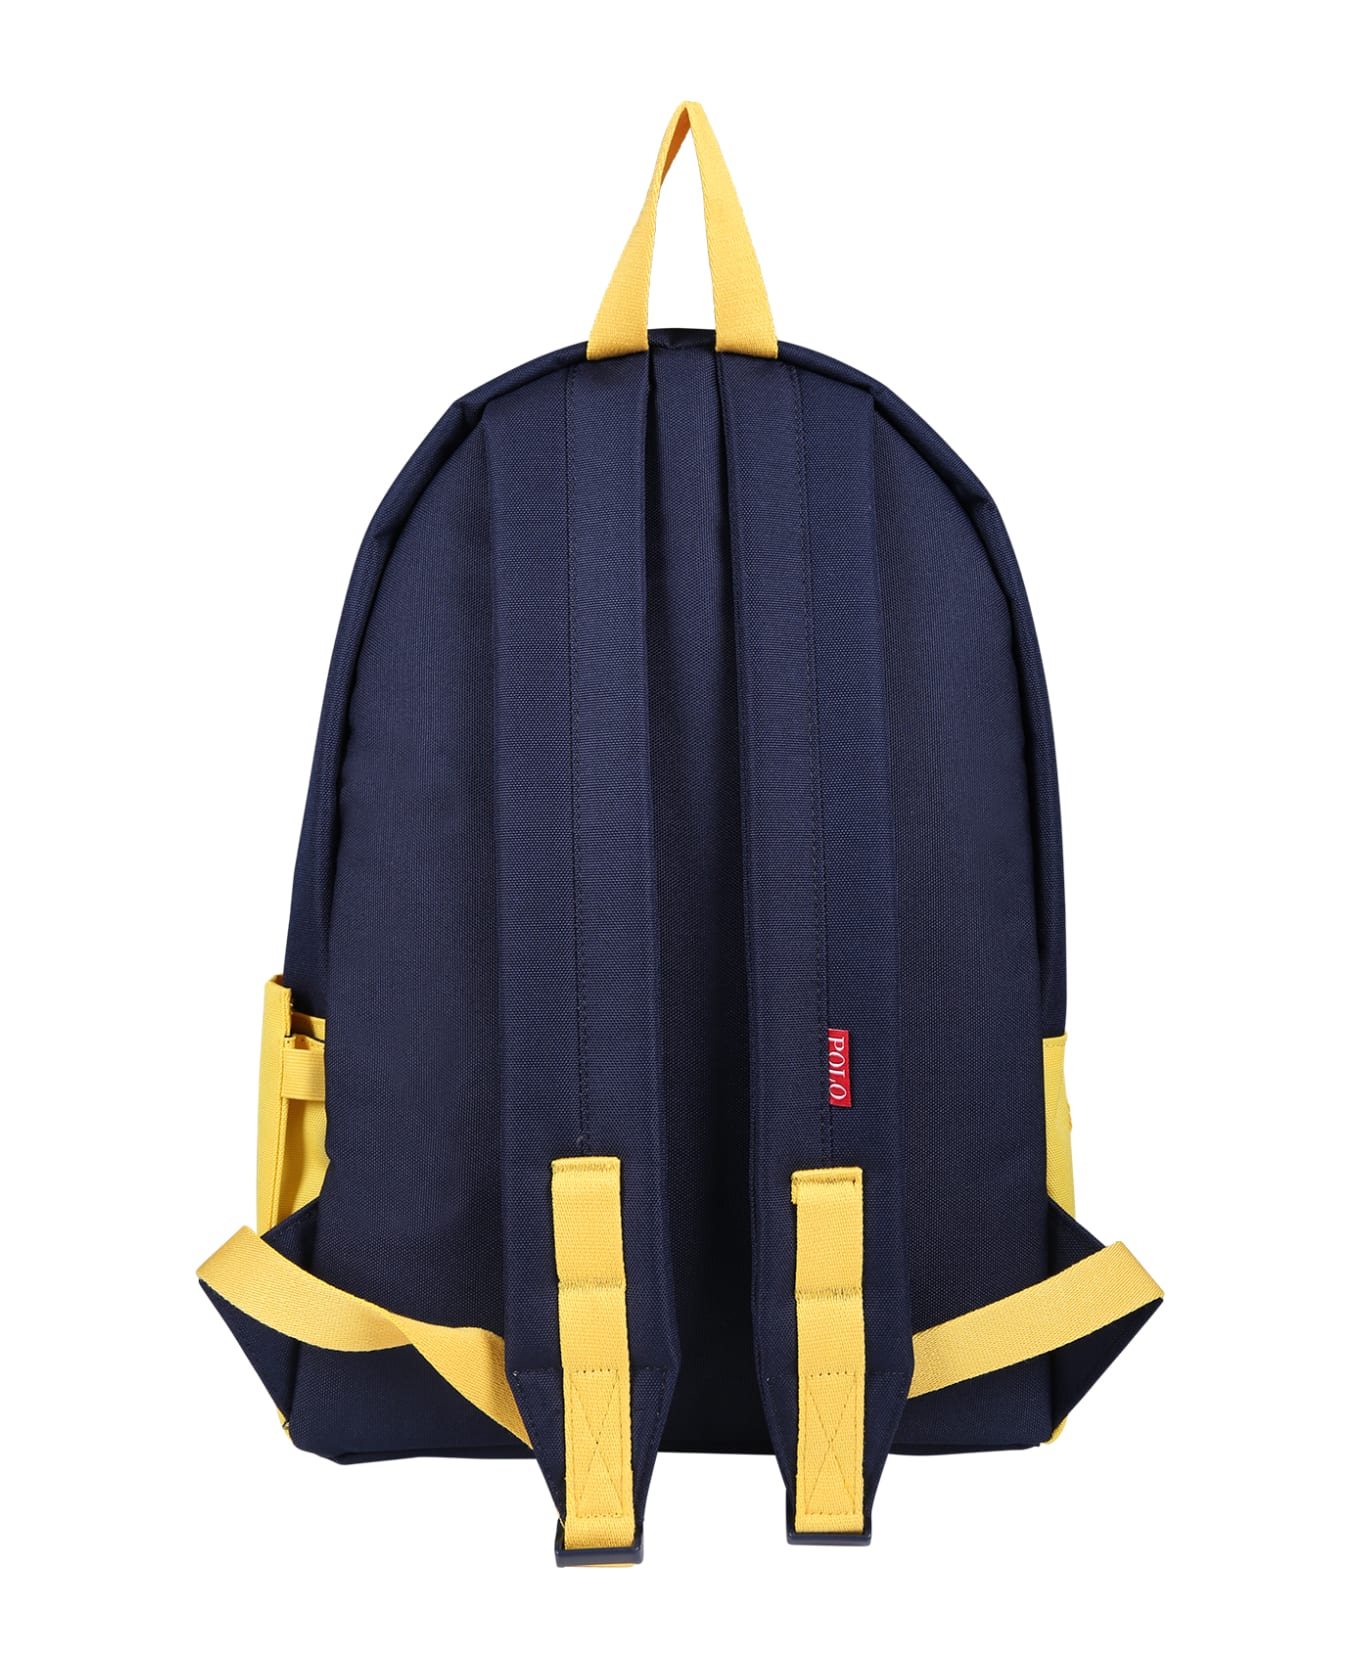 Ralph Lauren Colorblock Backpack With Bear For Kids - Multicolor アクセサリー＆ギフト